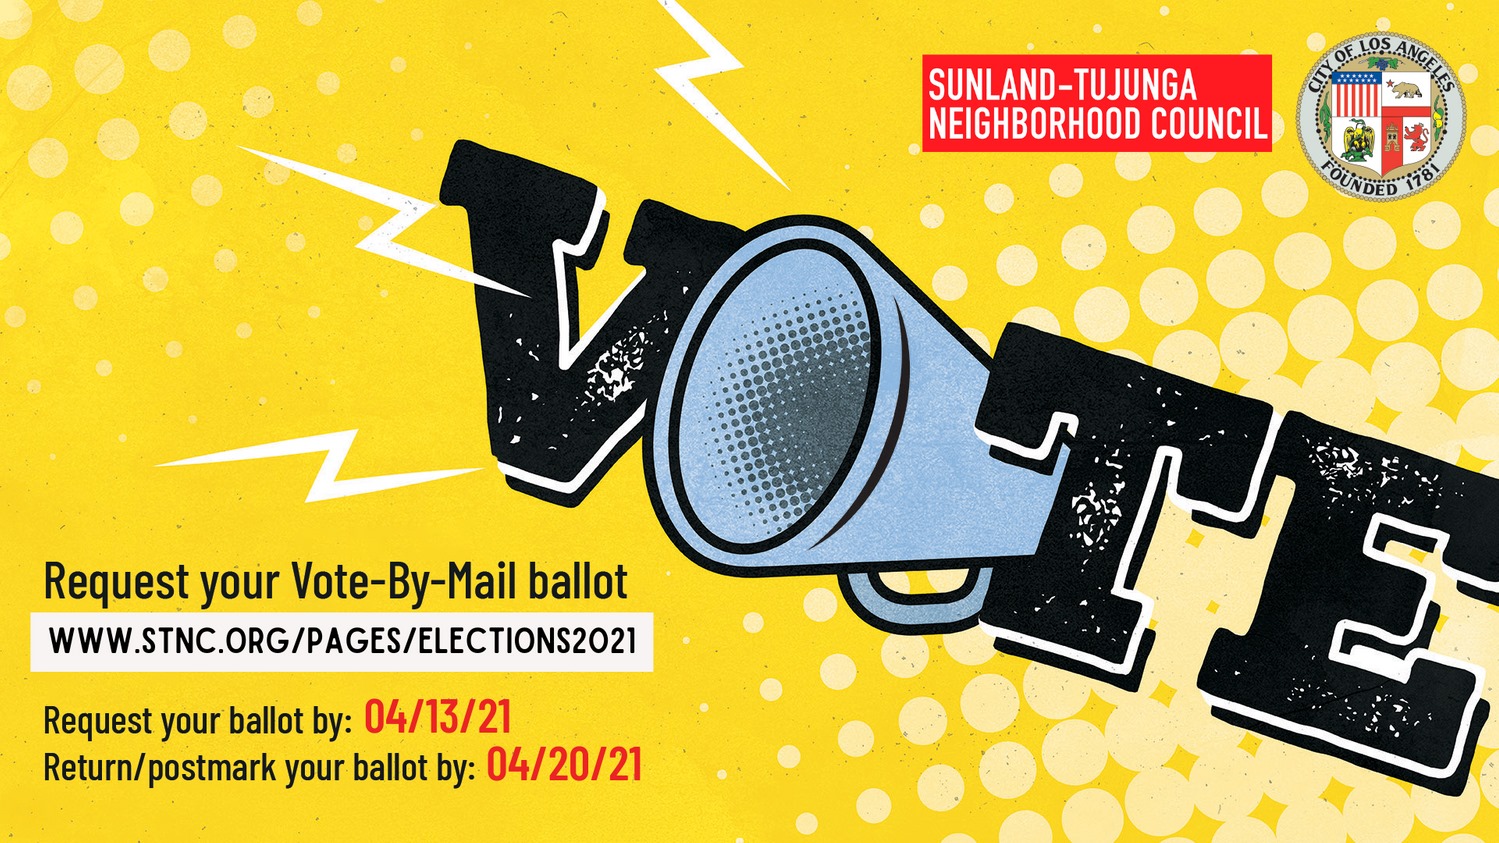 Request Your Neighborhood Council Vote-By-Mail Ballot 